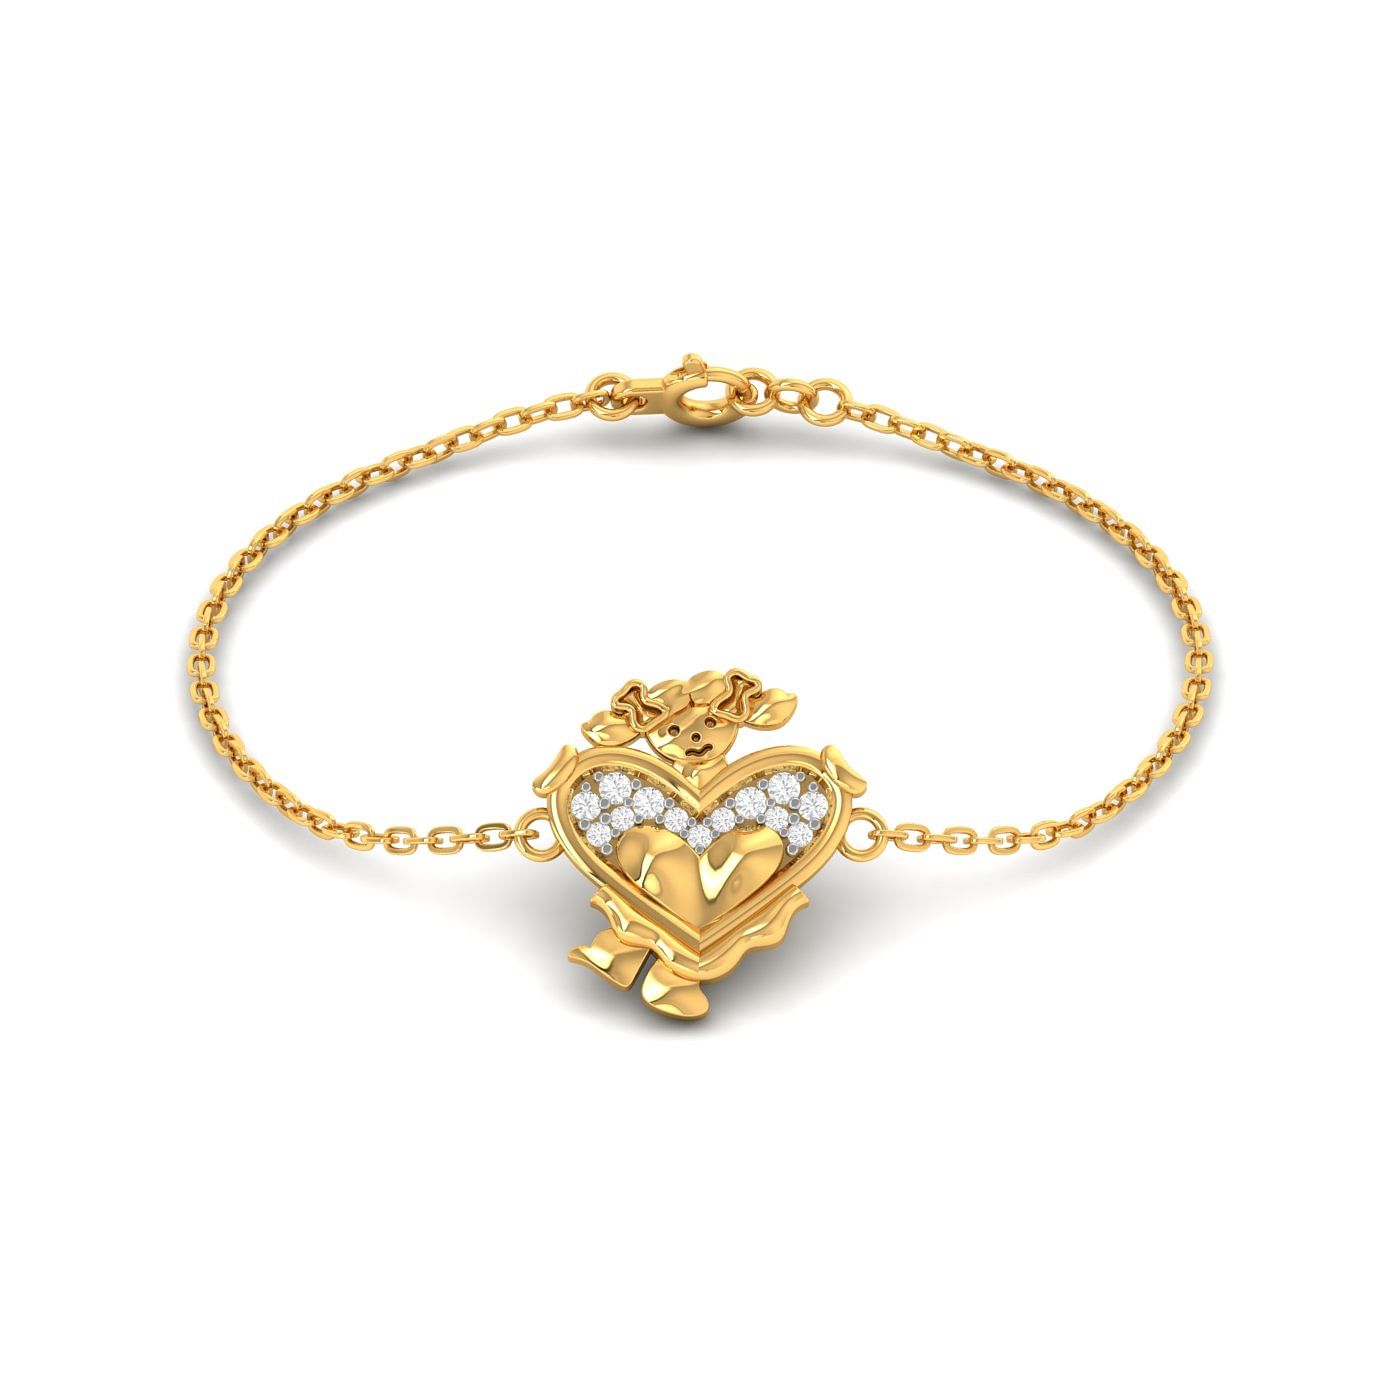 22K Gold Baby Bracelets Pair (4.60G) - Queen of Hearts Jewelry